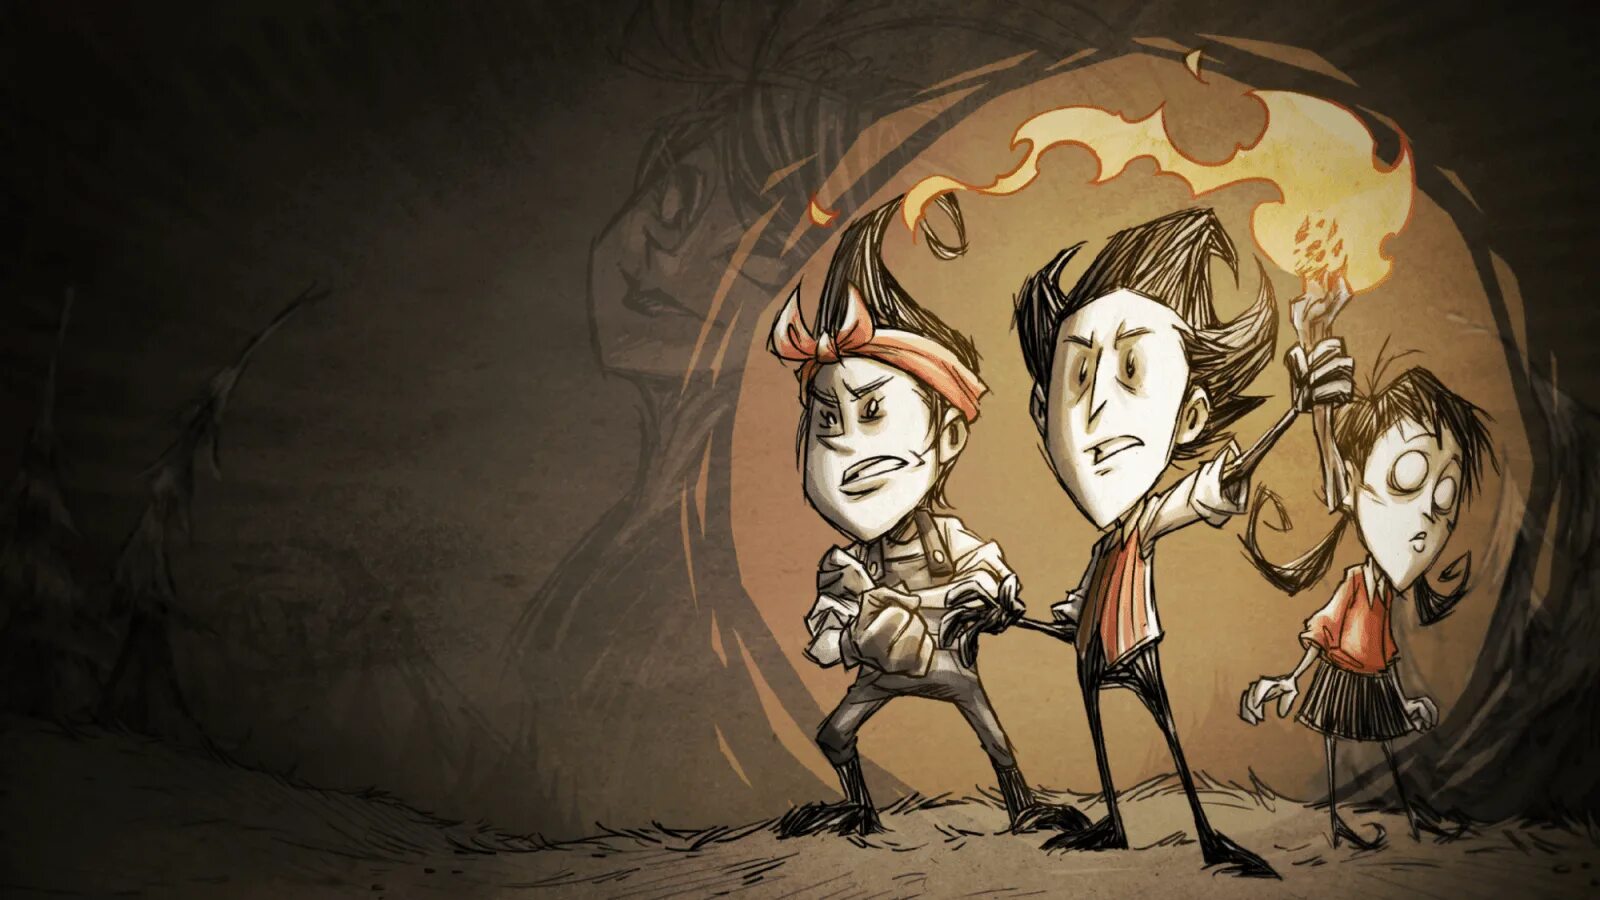 Don t starve gaming. Don t Starve together. Don't Starve Вайнона. Don't Starve together стрим. Донт старв Гамлет.